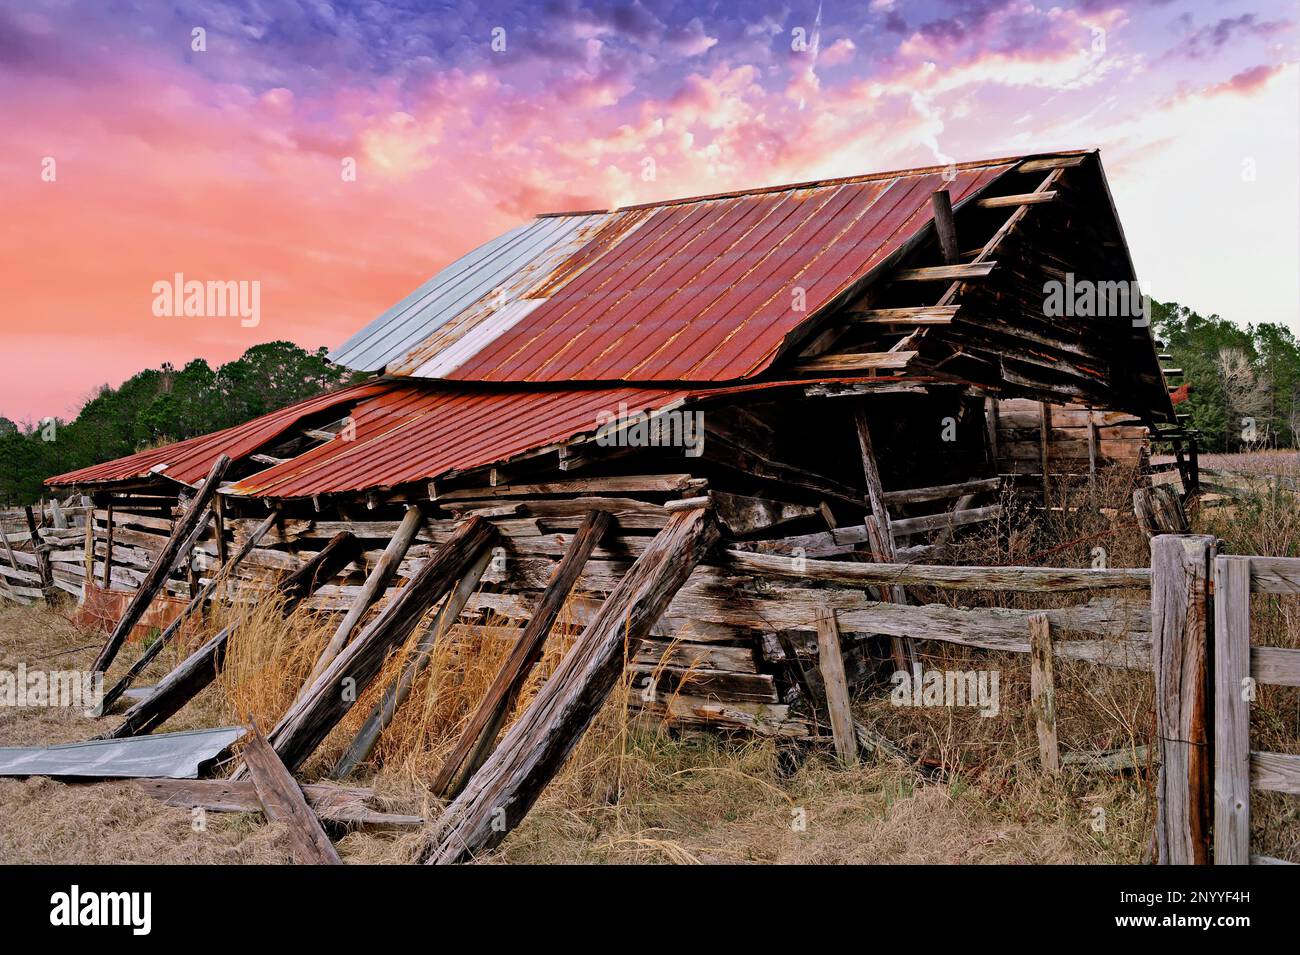 An Old Abandoned Run Down Barn in a Field at Sunset Stock Photo